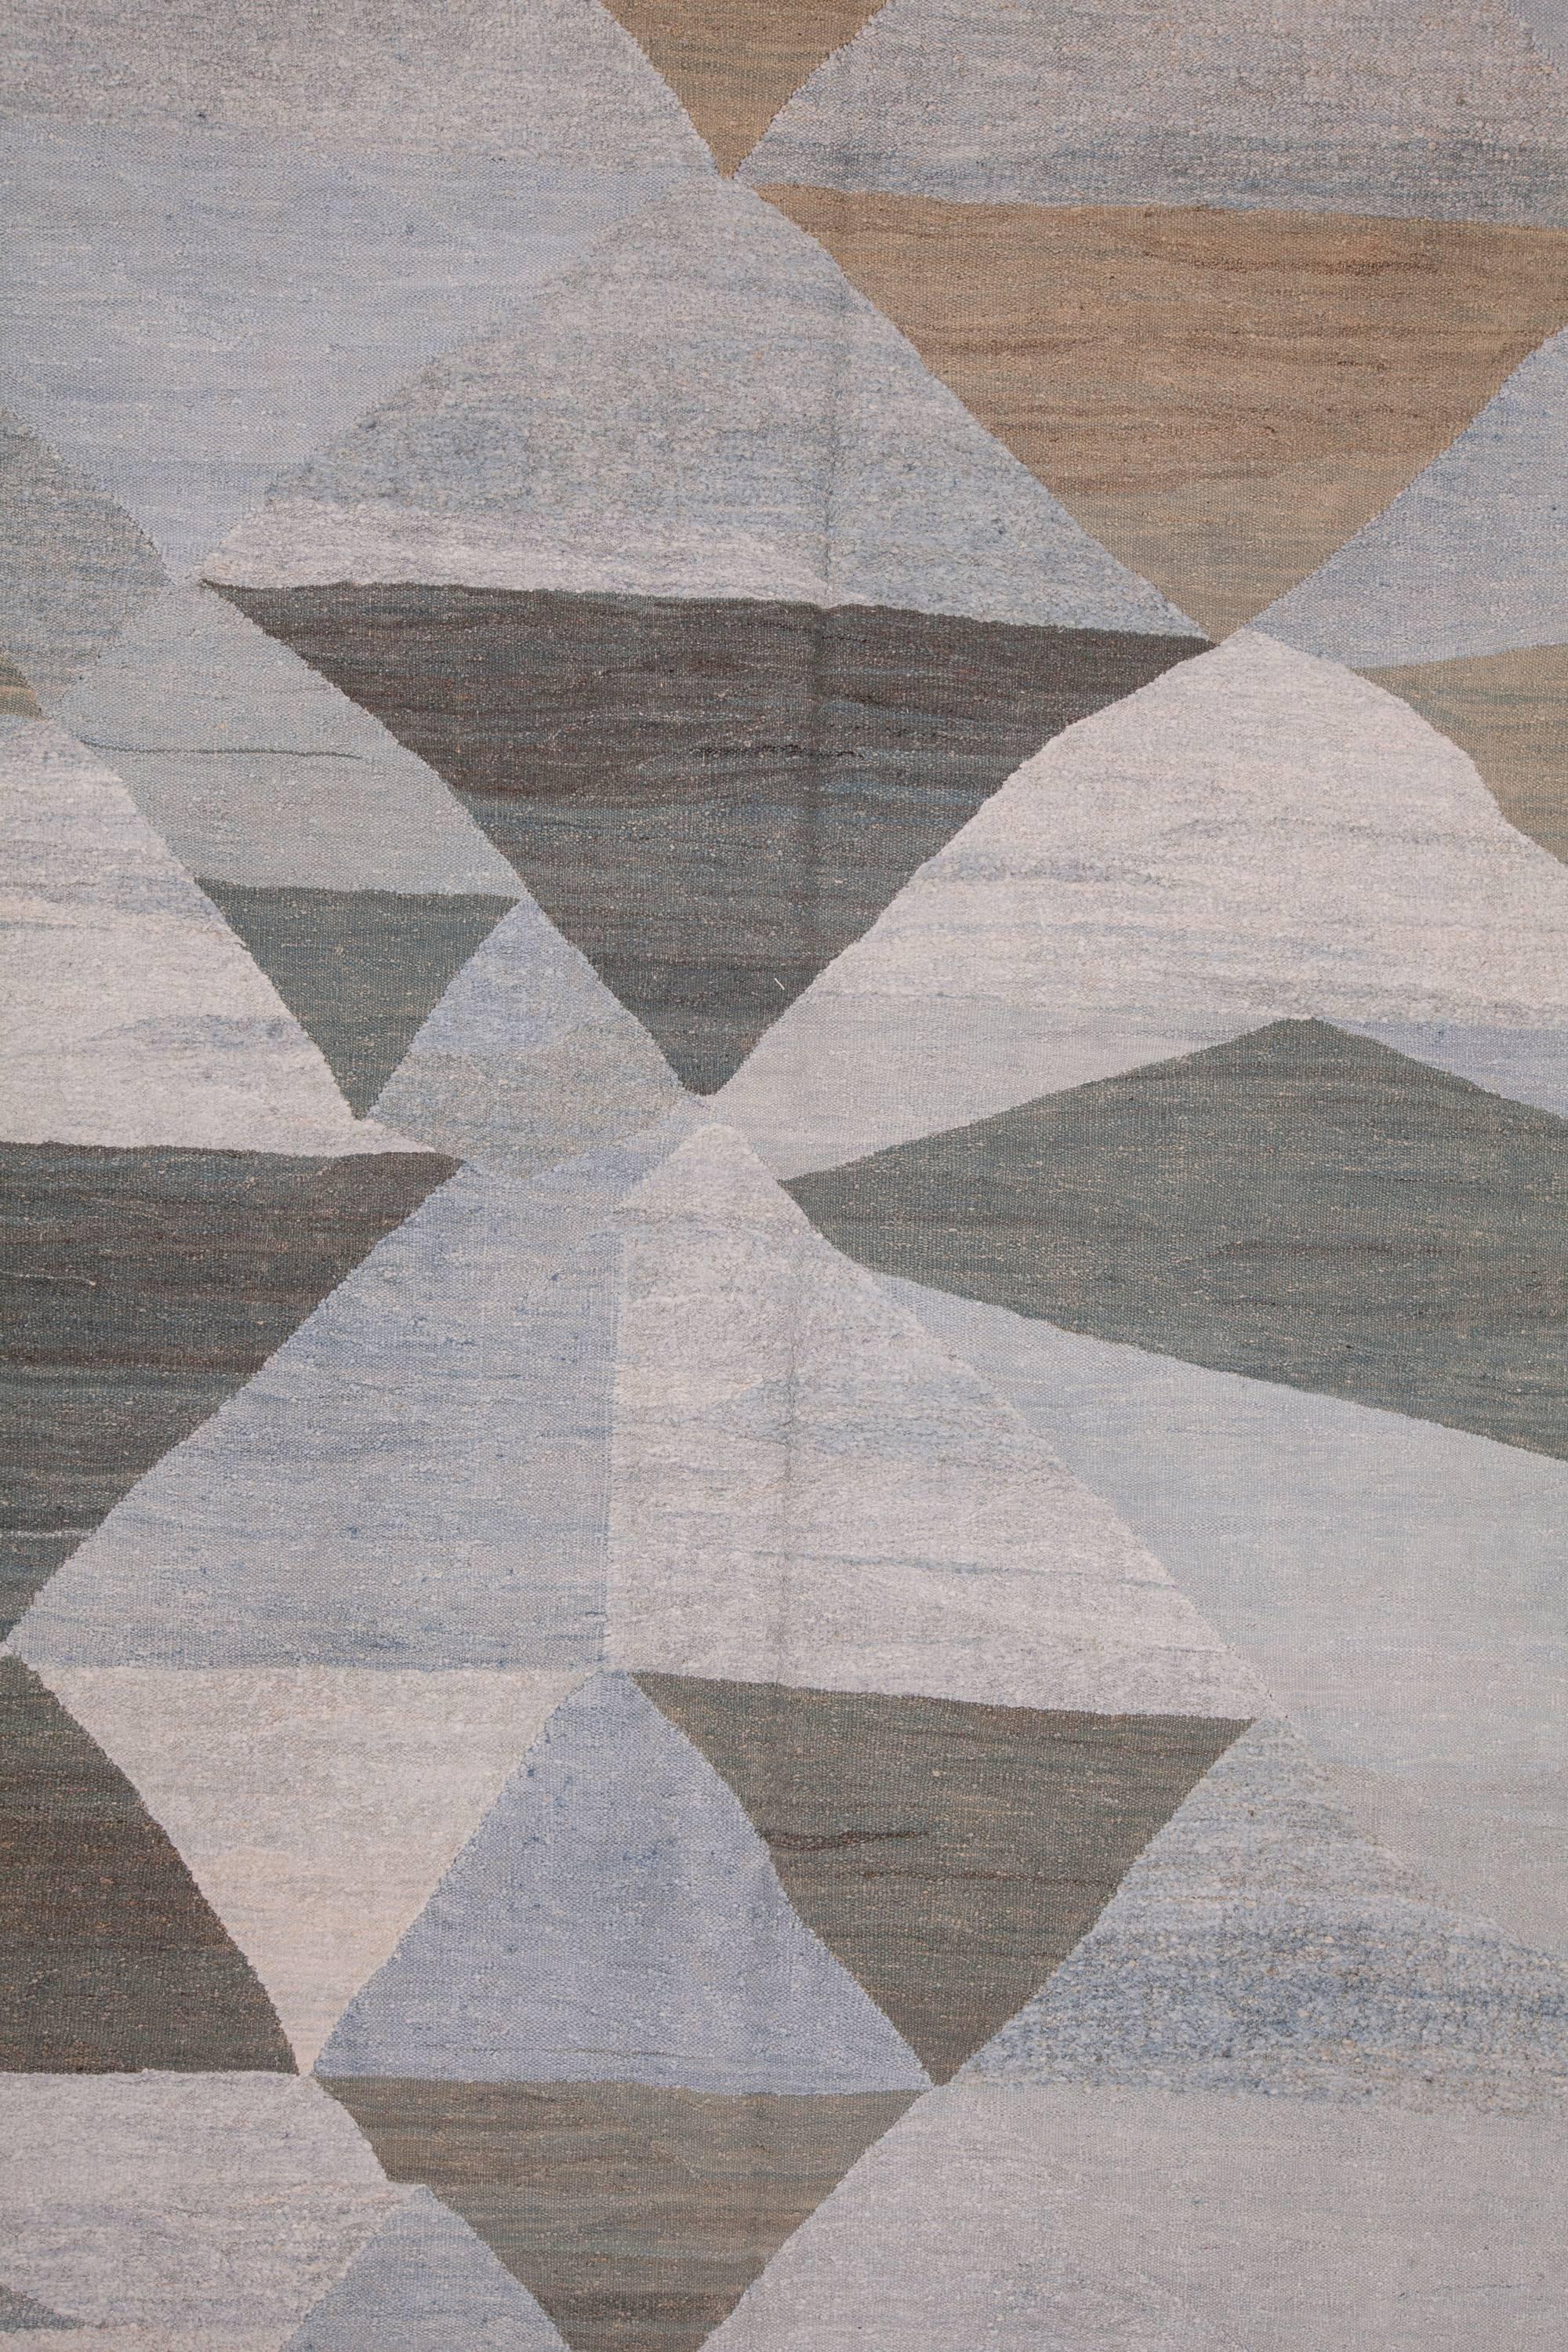 Hand-Woven Contemporary Turkish Kilim Made from Recycled Hemp